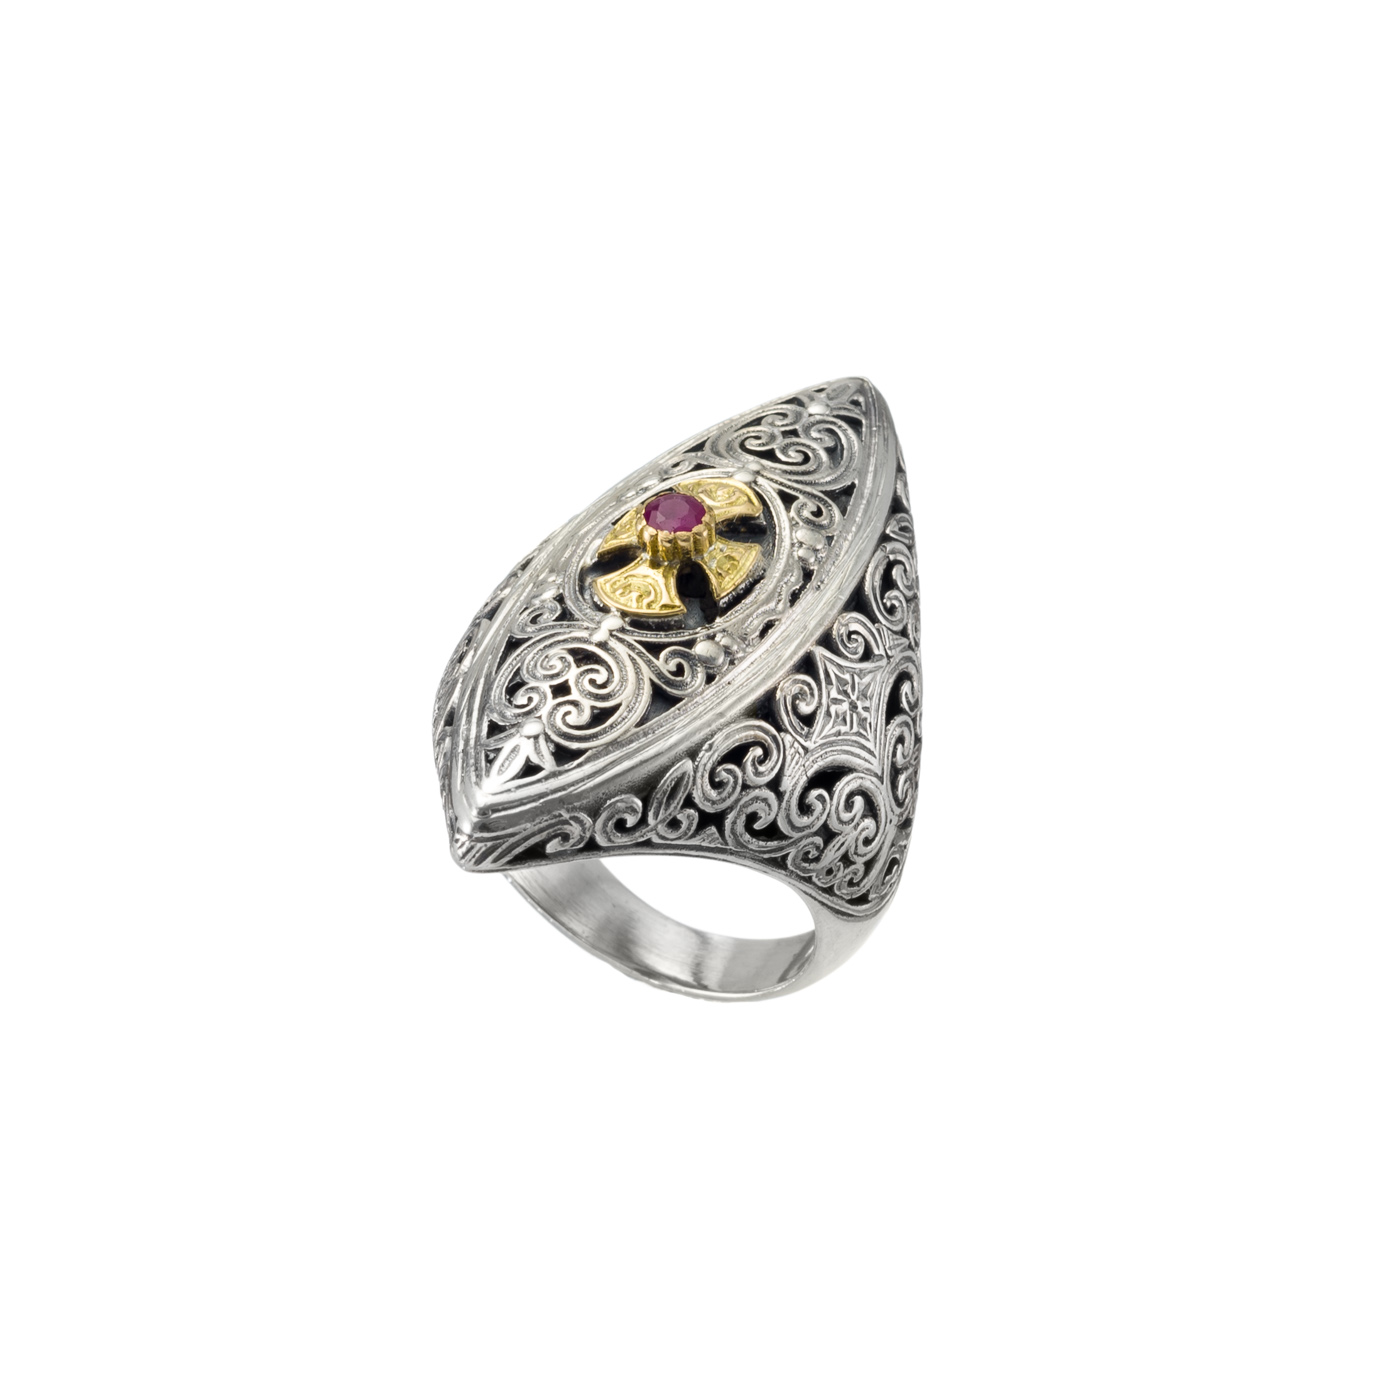 Faidra Cross Ring in 18K Gold and Sterling Silver